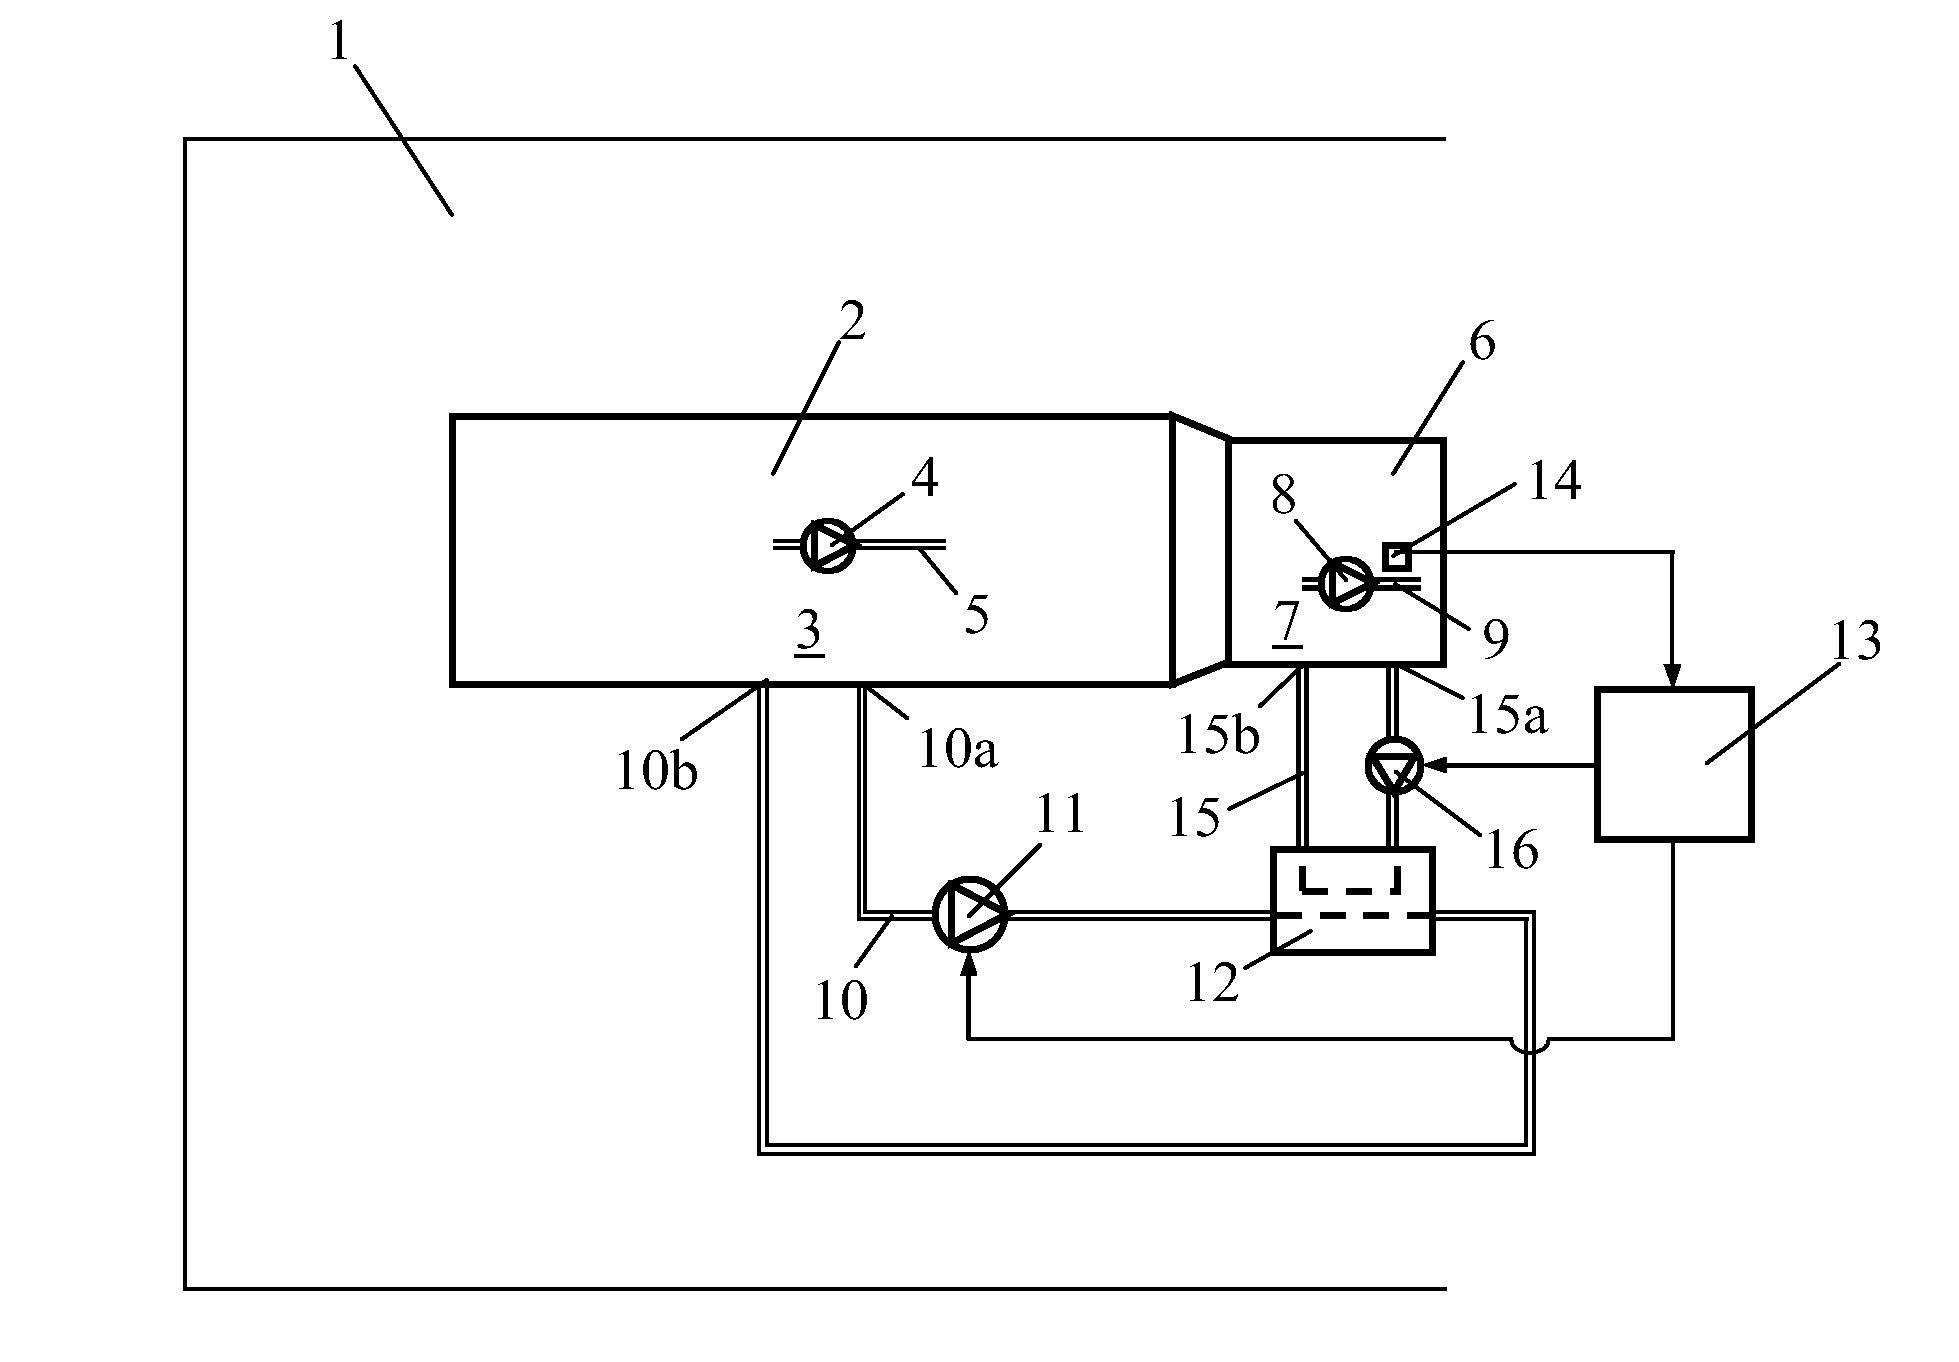 Arrangement for heating oil in a gearbox